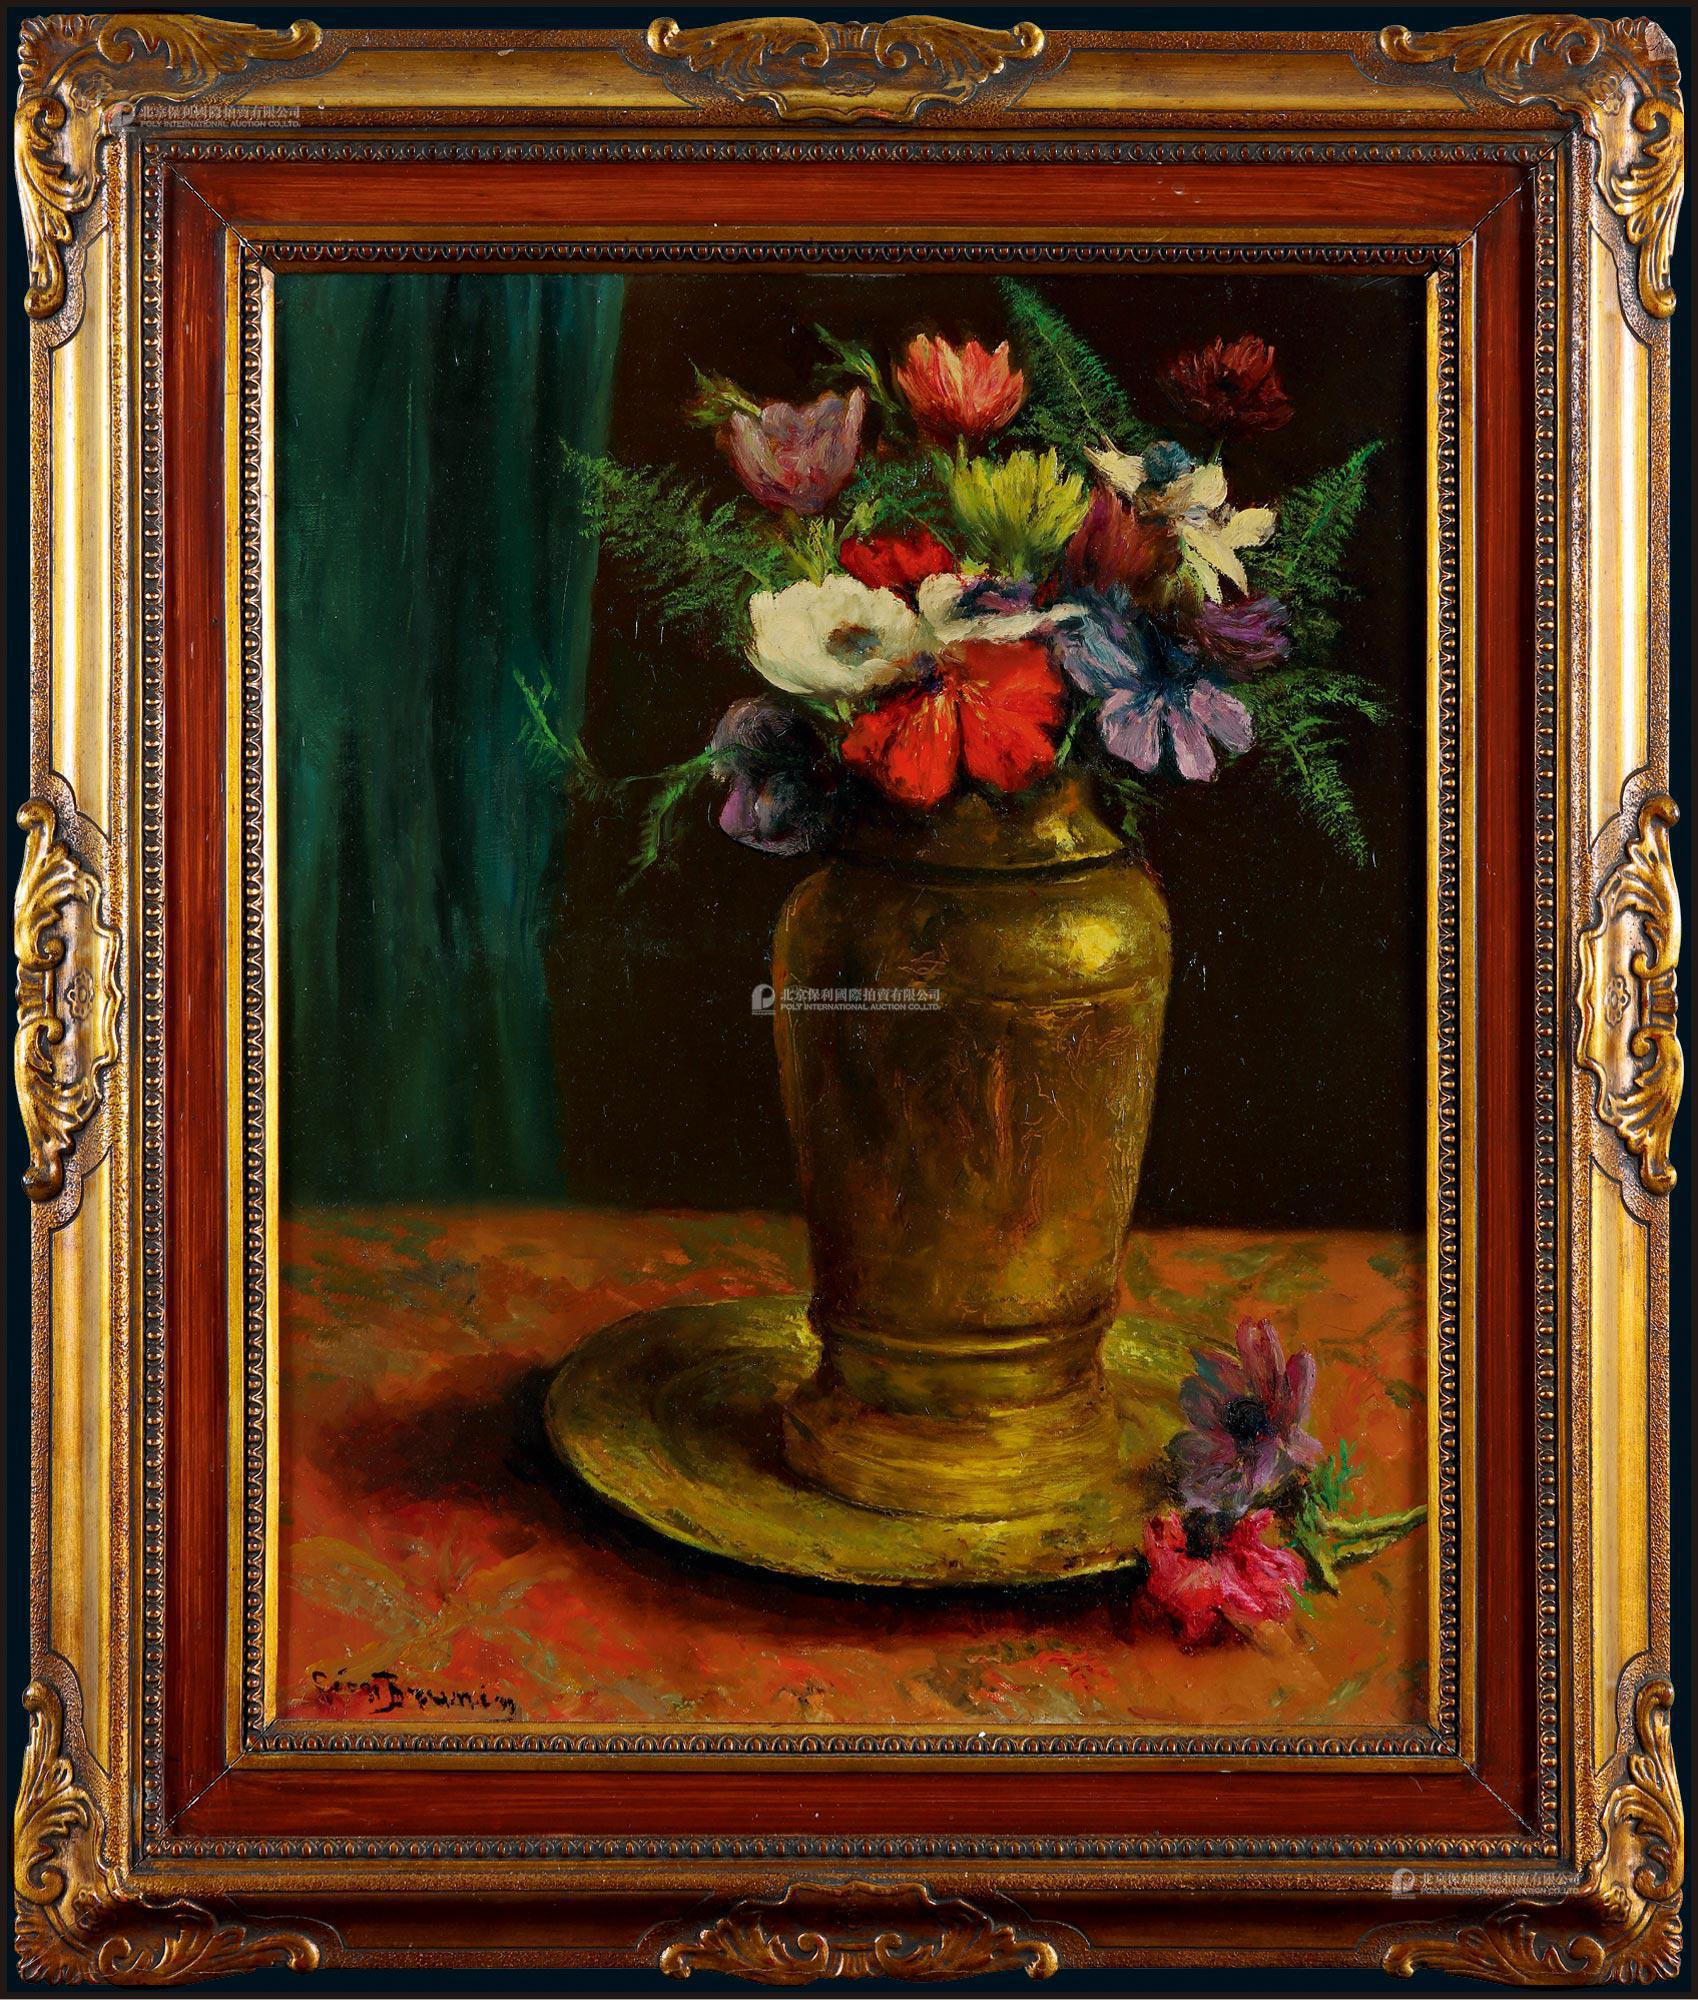 The oil painting “Flower in a Bottle” by Leon Brunin, a famous Belgian landscape painter and sculptor, with a certificate